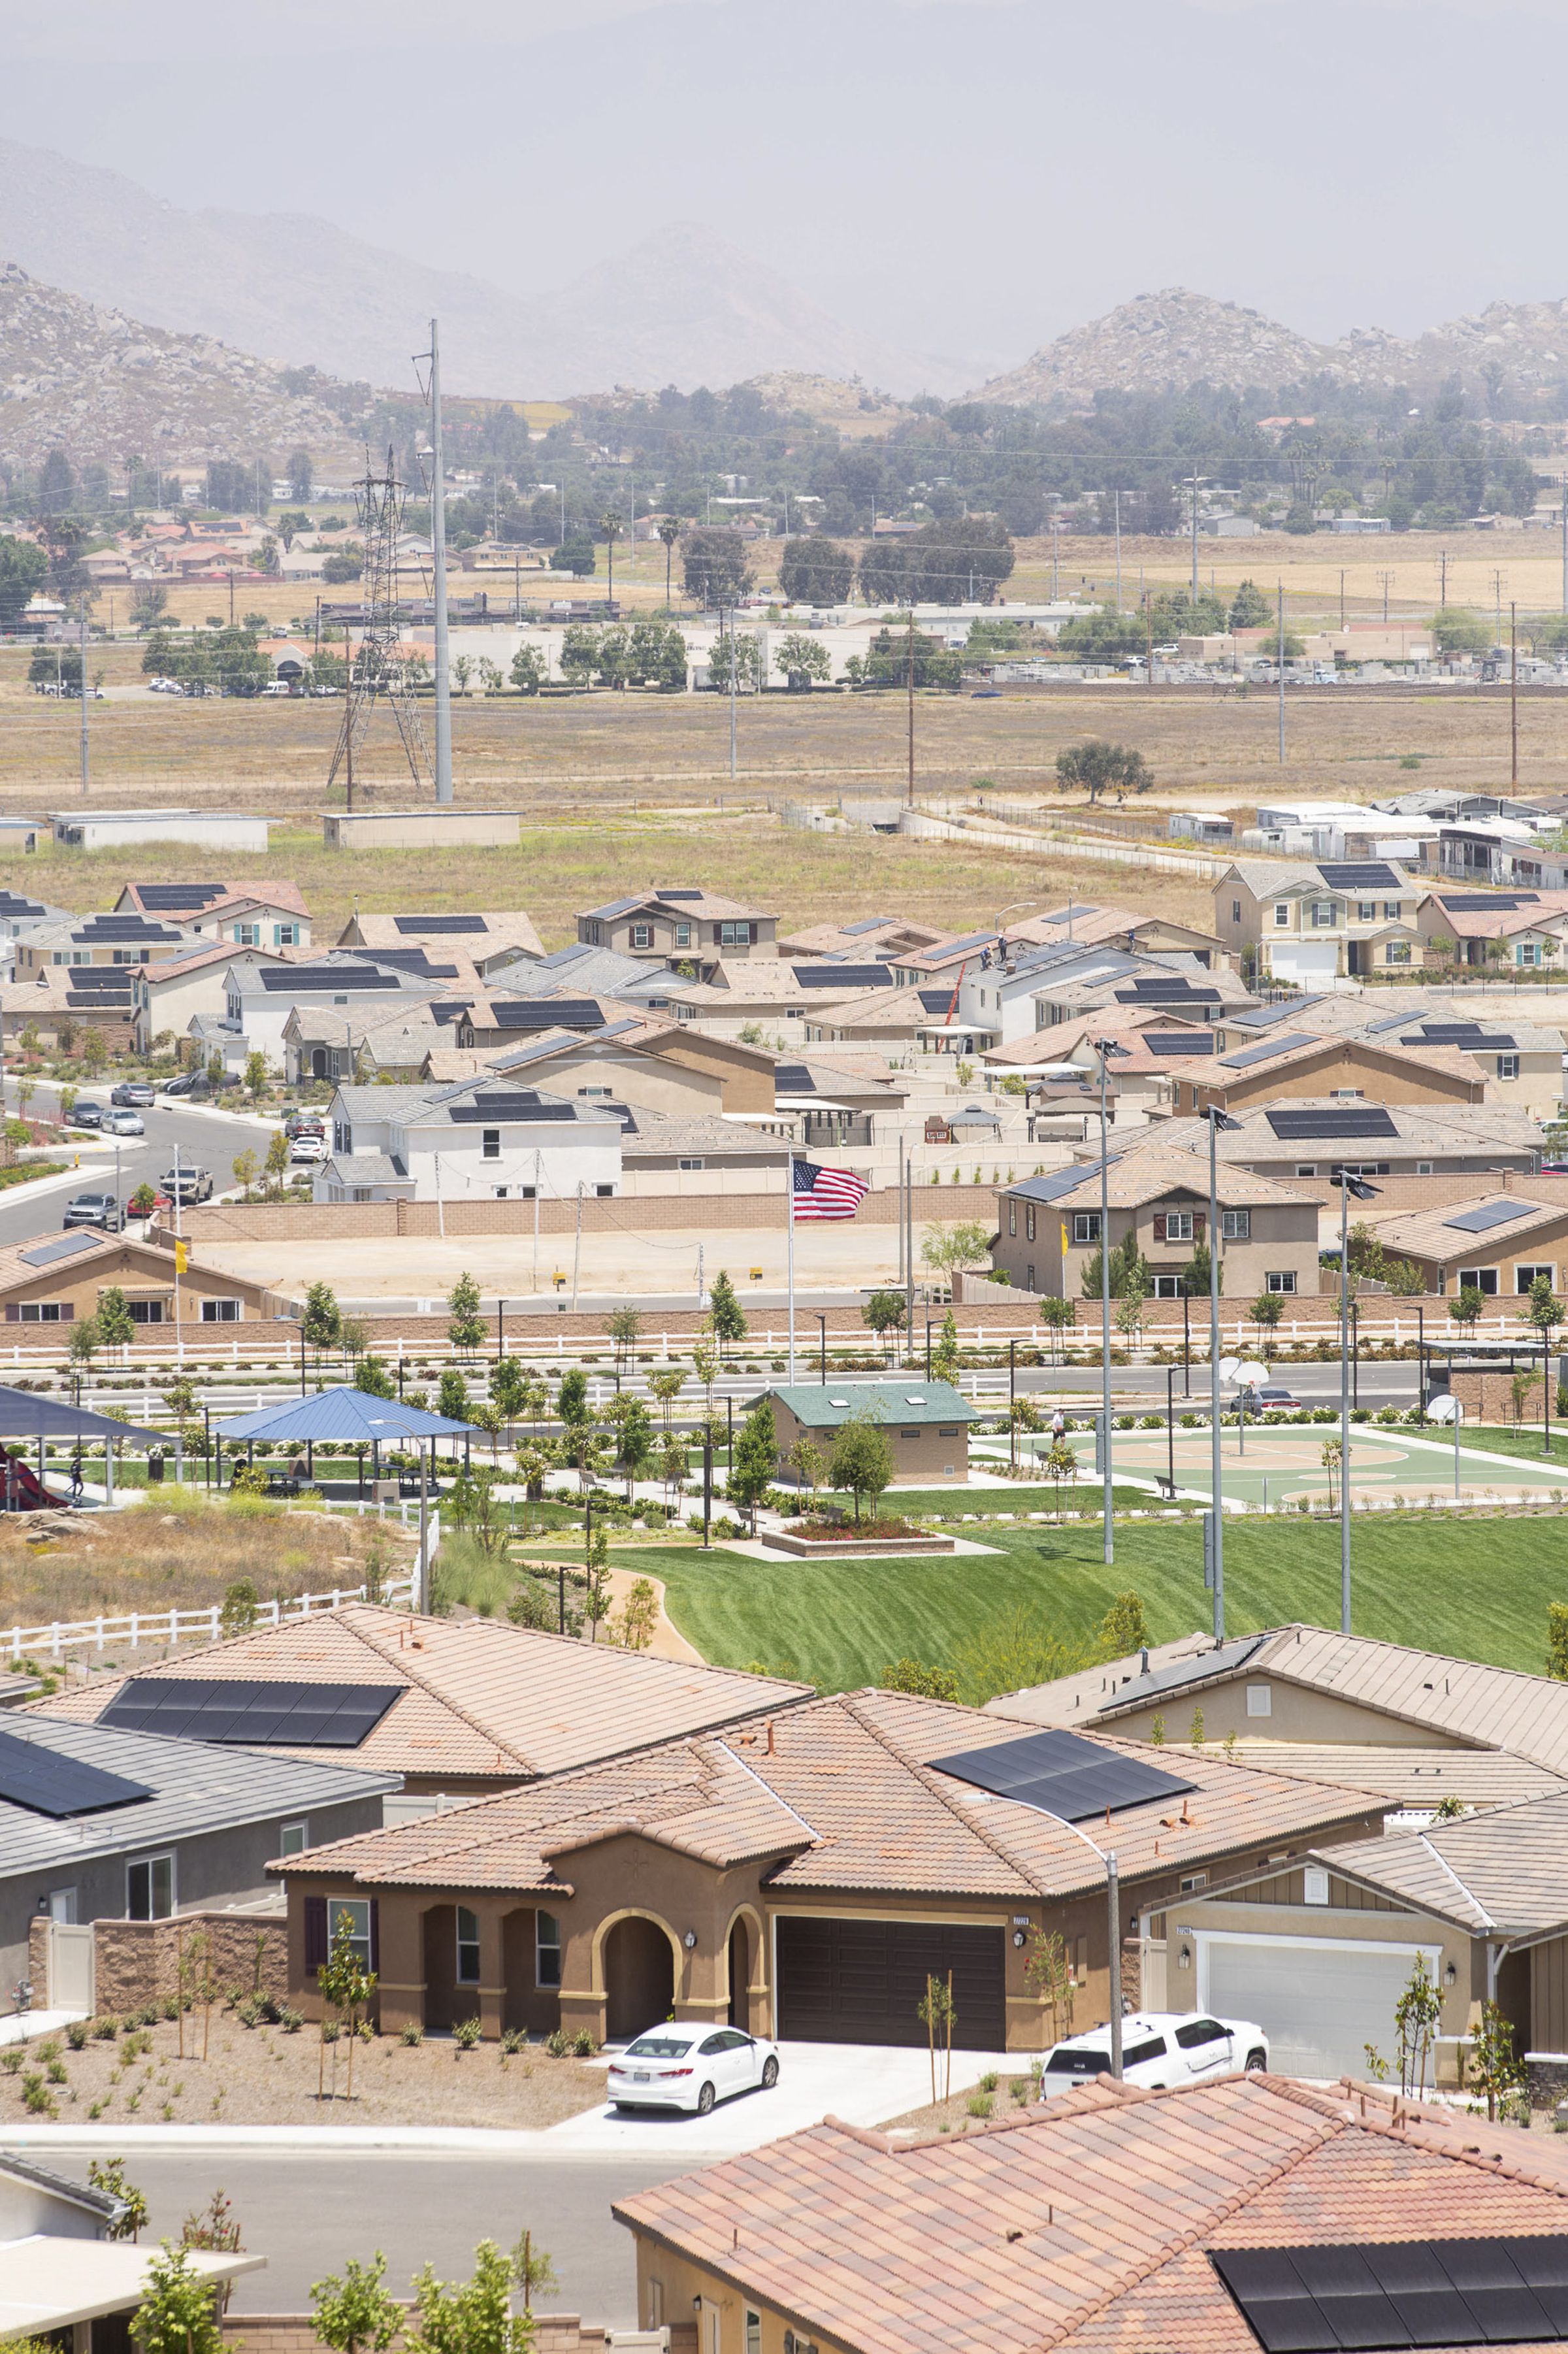 Shadow Mountain is comprised of two connected communities: Durango and Oak Shade.